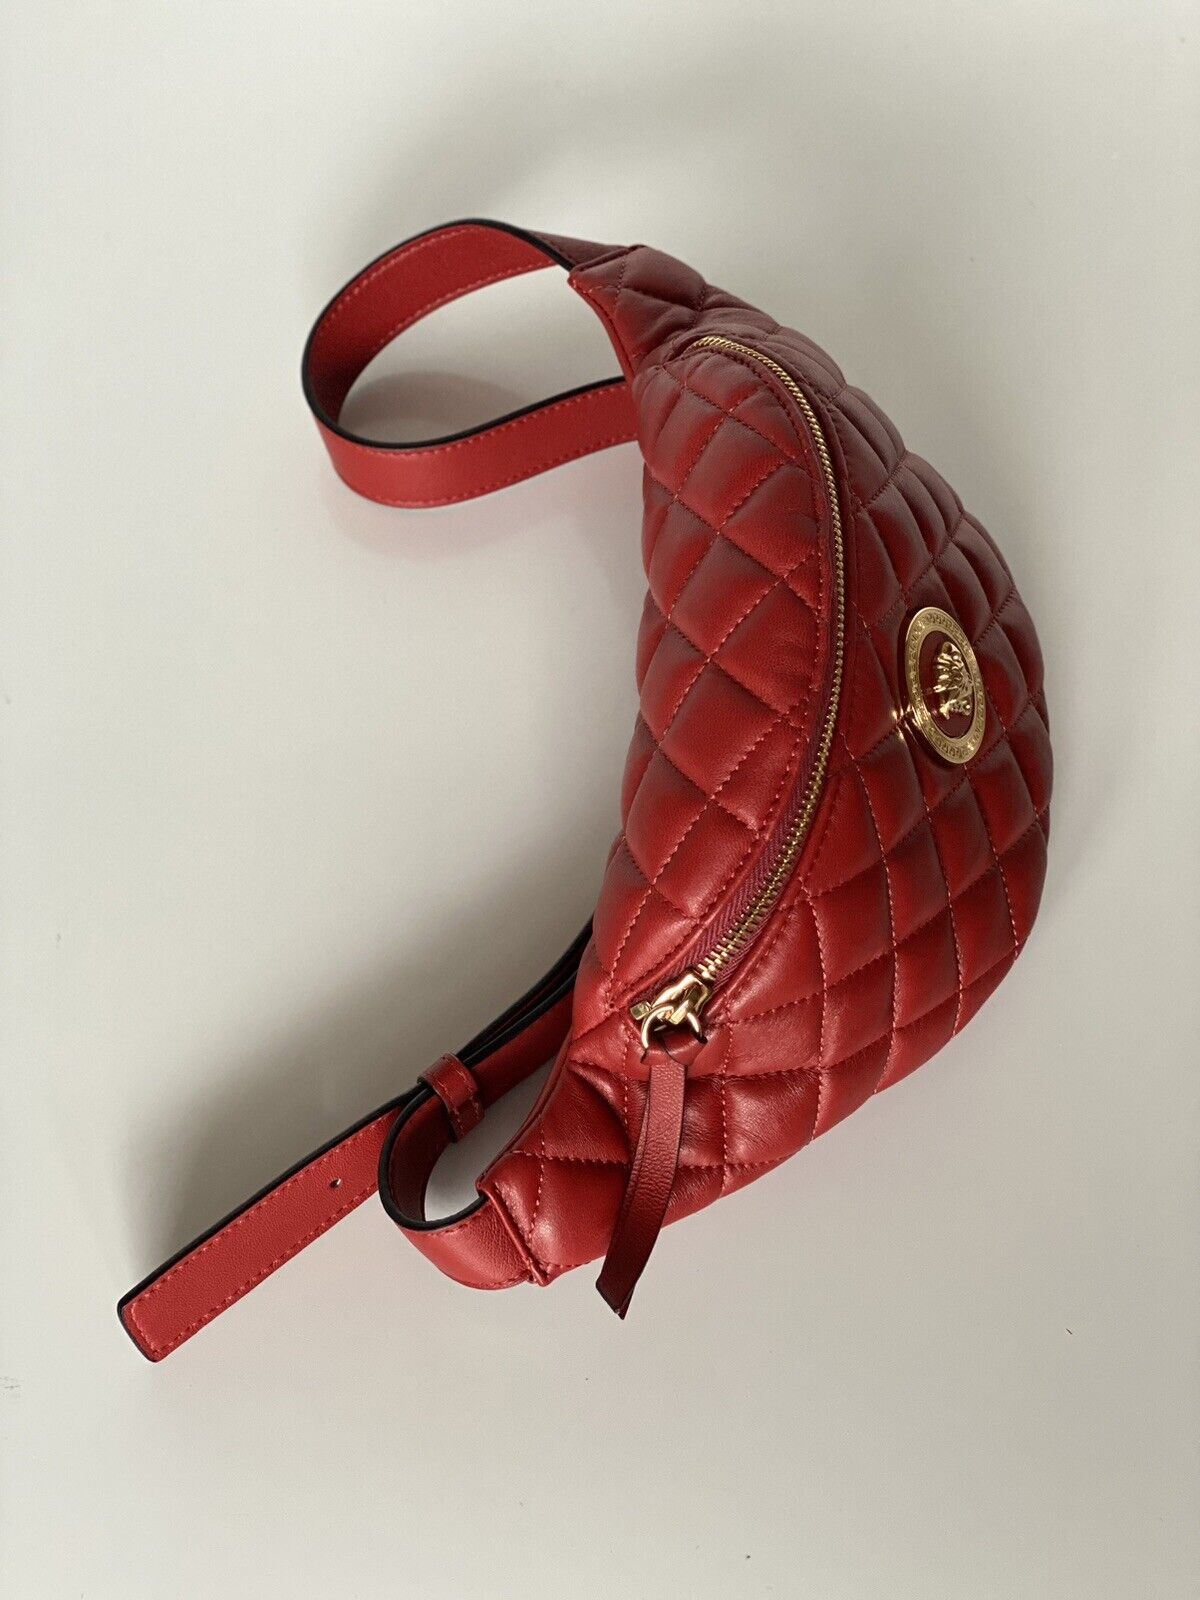 NWT Versace Women's Quilted Lamb Leather Red Belt /Waist/Body Bag 1A02151 Italy